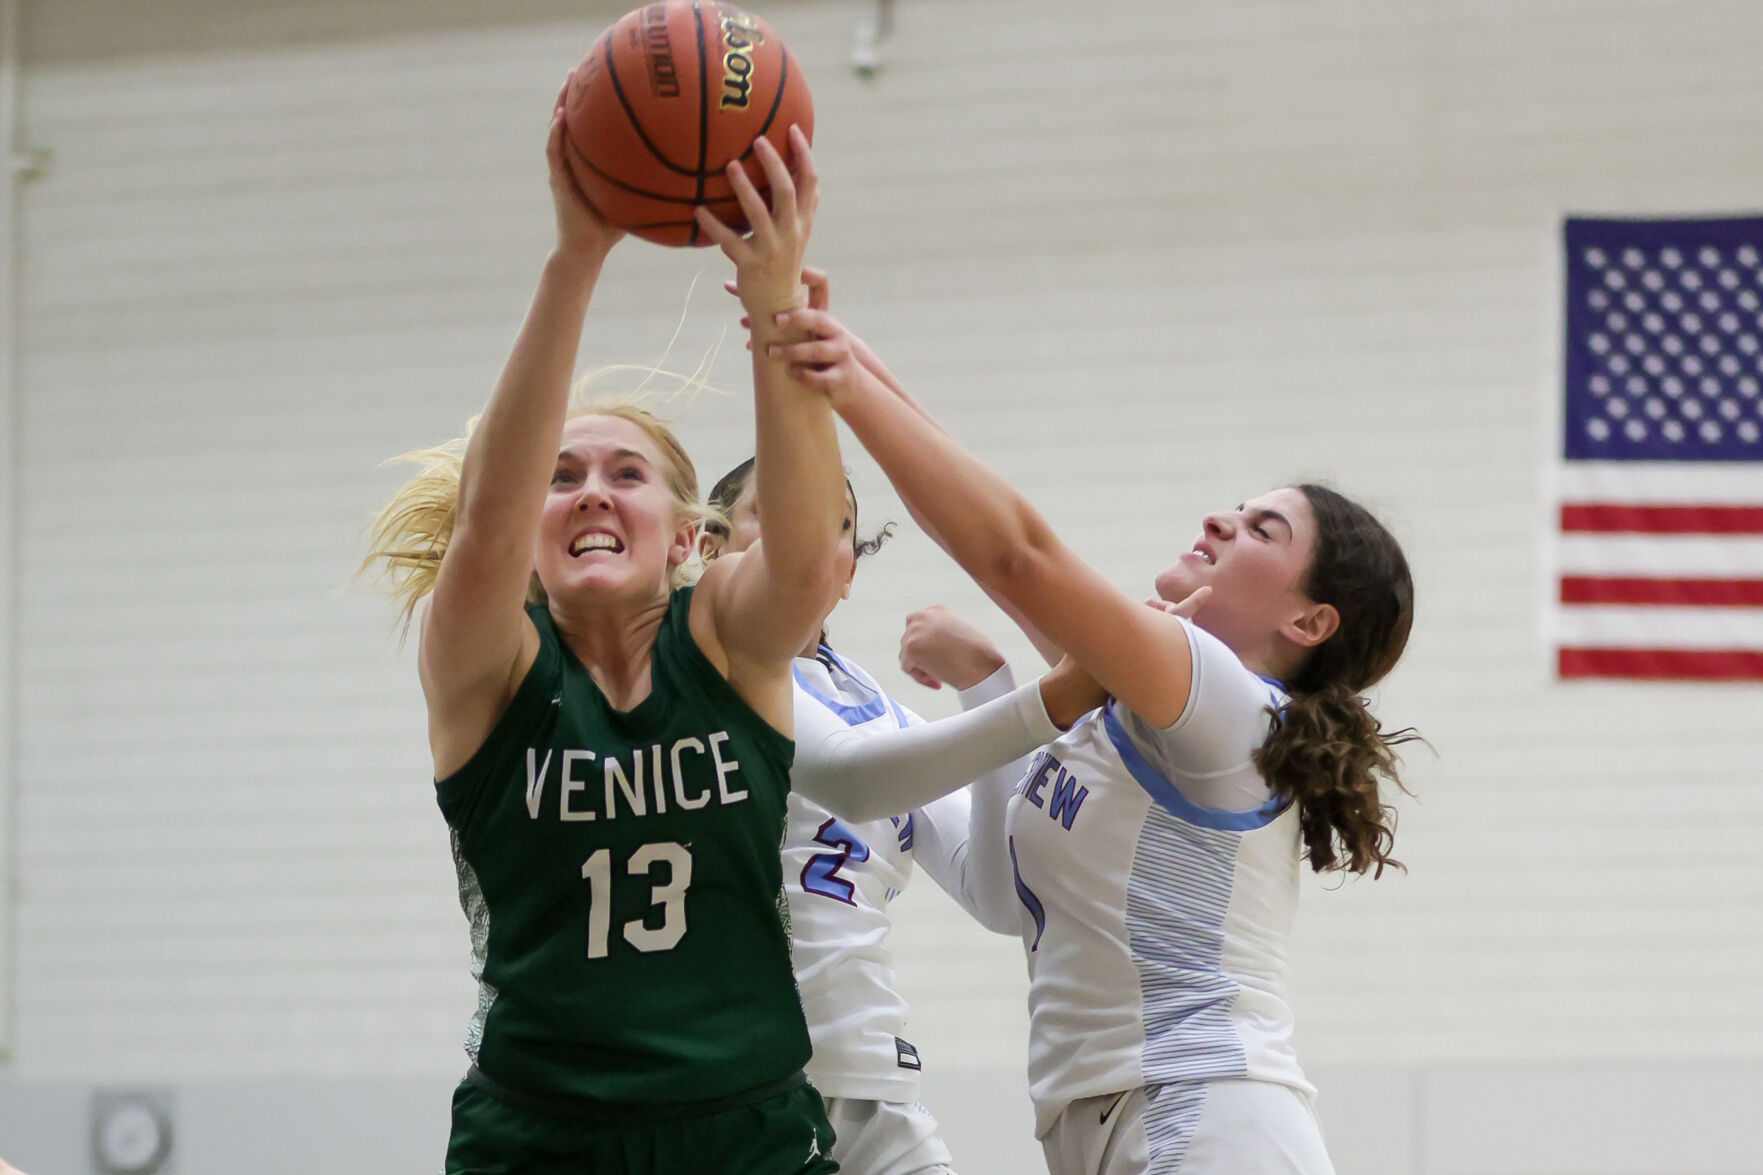 Venice Girls Basketball Defend Title with Grit: 7A-12 District Champions Again